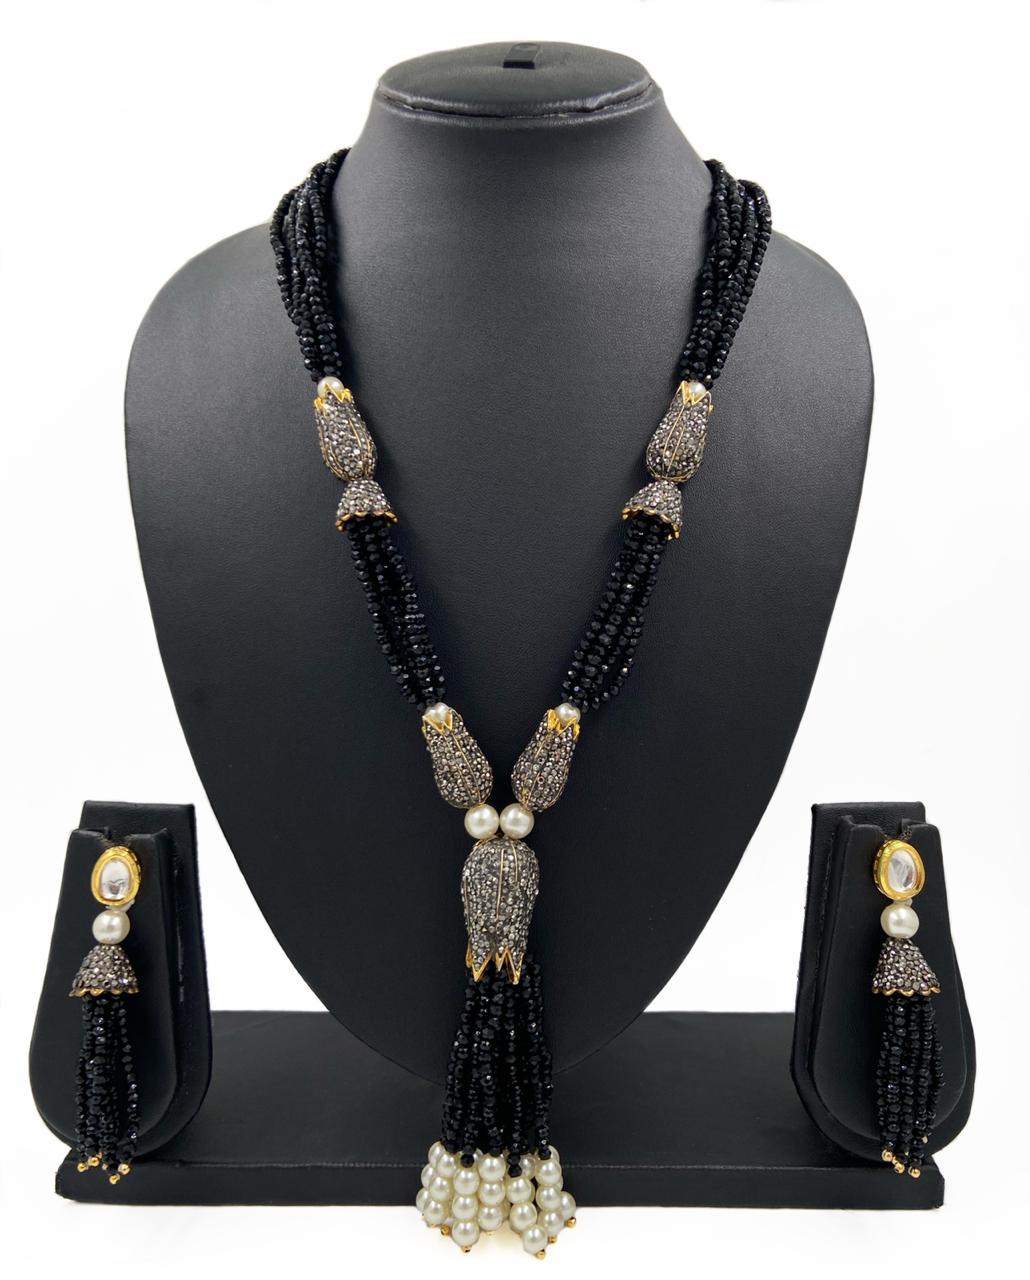 Designer Handmade Multilayered Black Crystal Beads Necklace Set For Woman Beads Jewellery